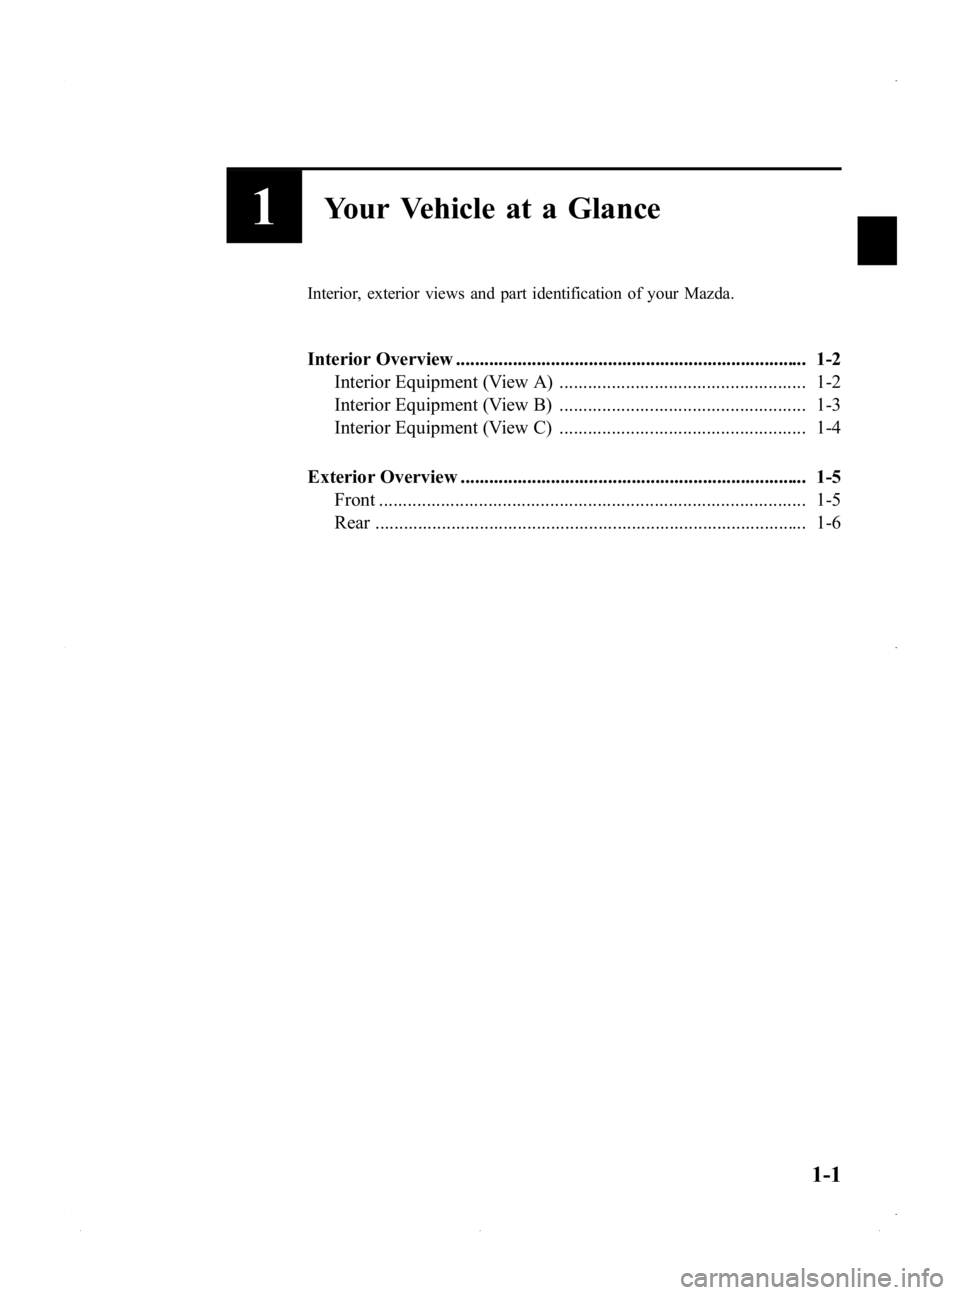 MAZDA MODEL MX-5 MIATA 2015  Owners Manual Black plate (7,1)
1Your Vehicle at a Glance
Interior, exterior views and part identification of your Mazda.
Interior Overview ..........................................................................